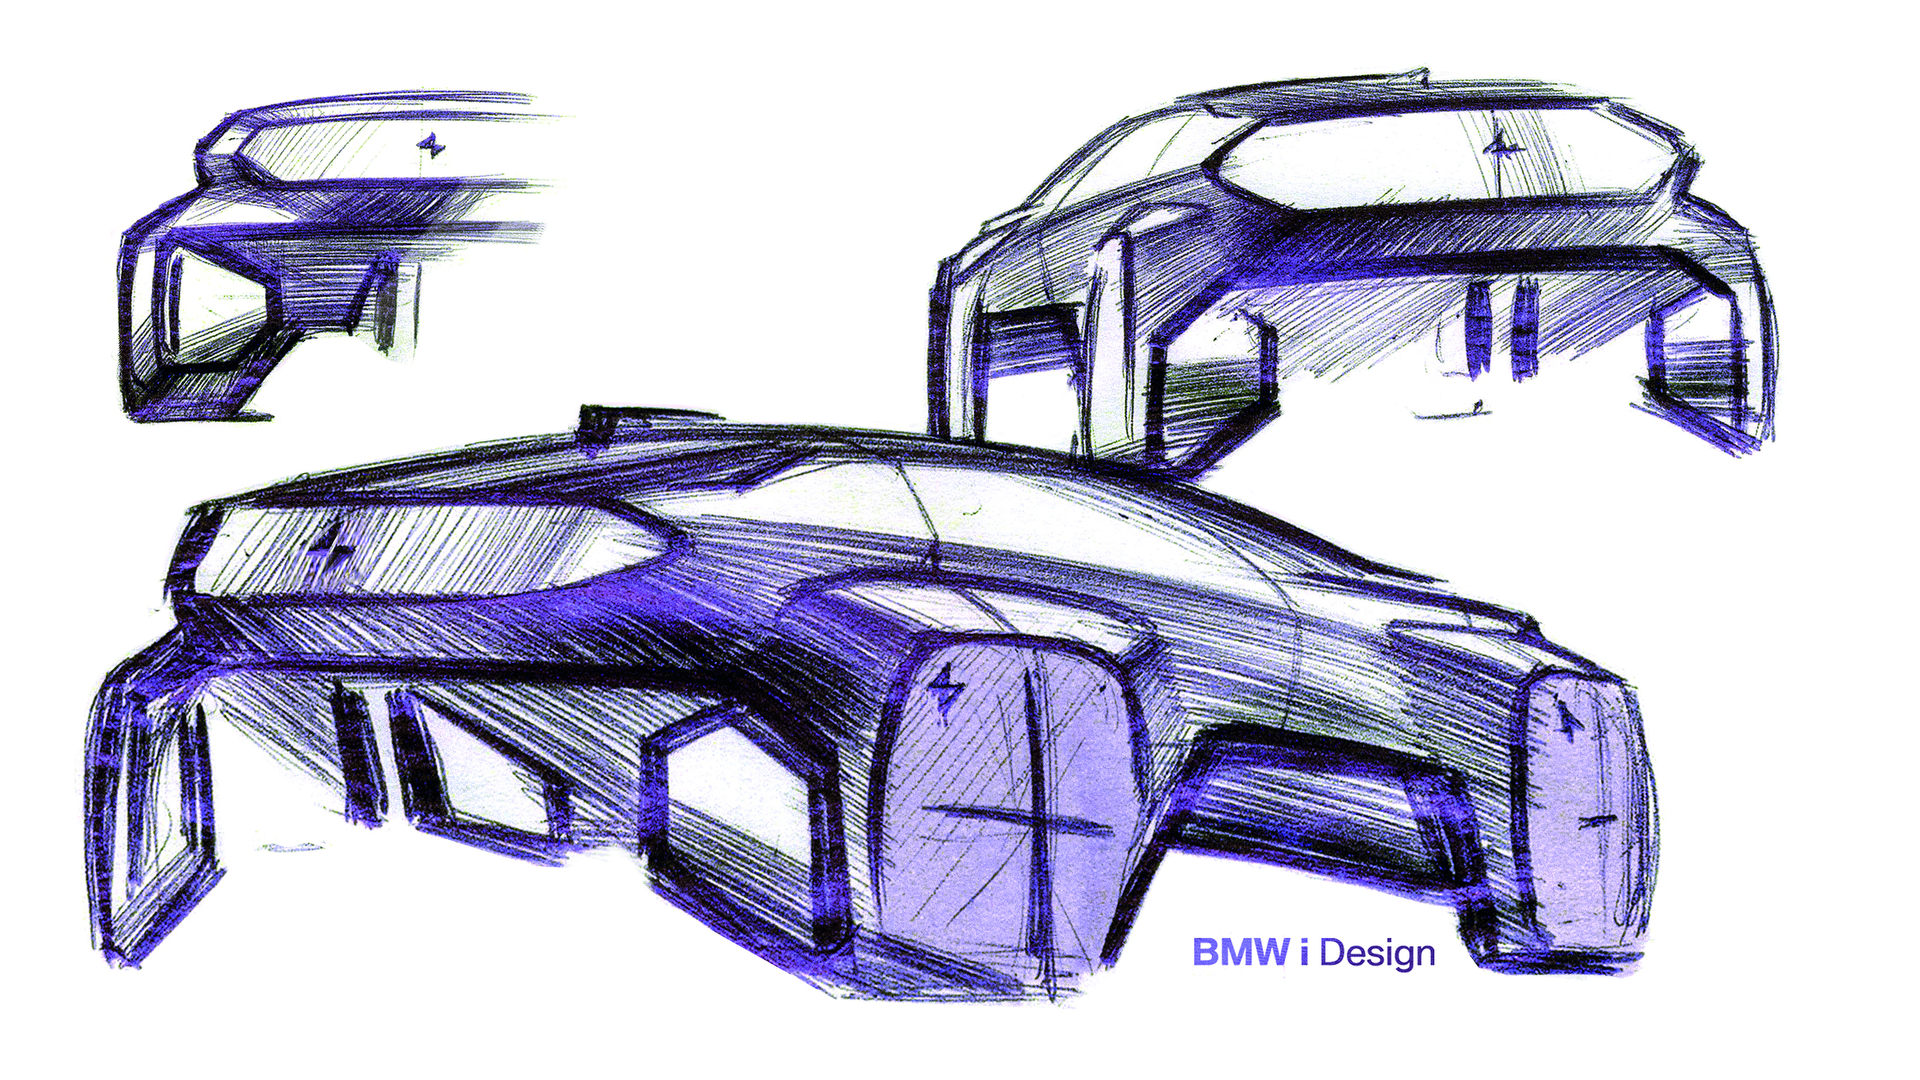 BMW Vision iNext Concept